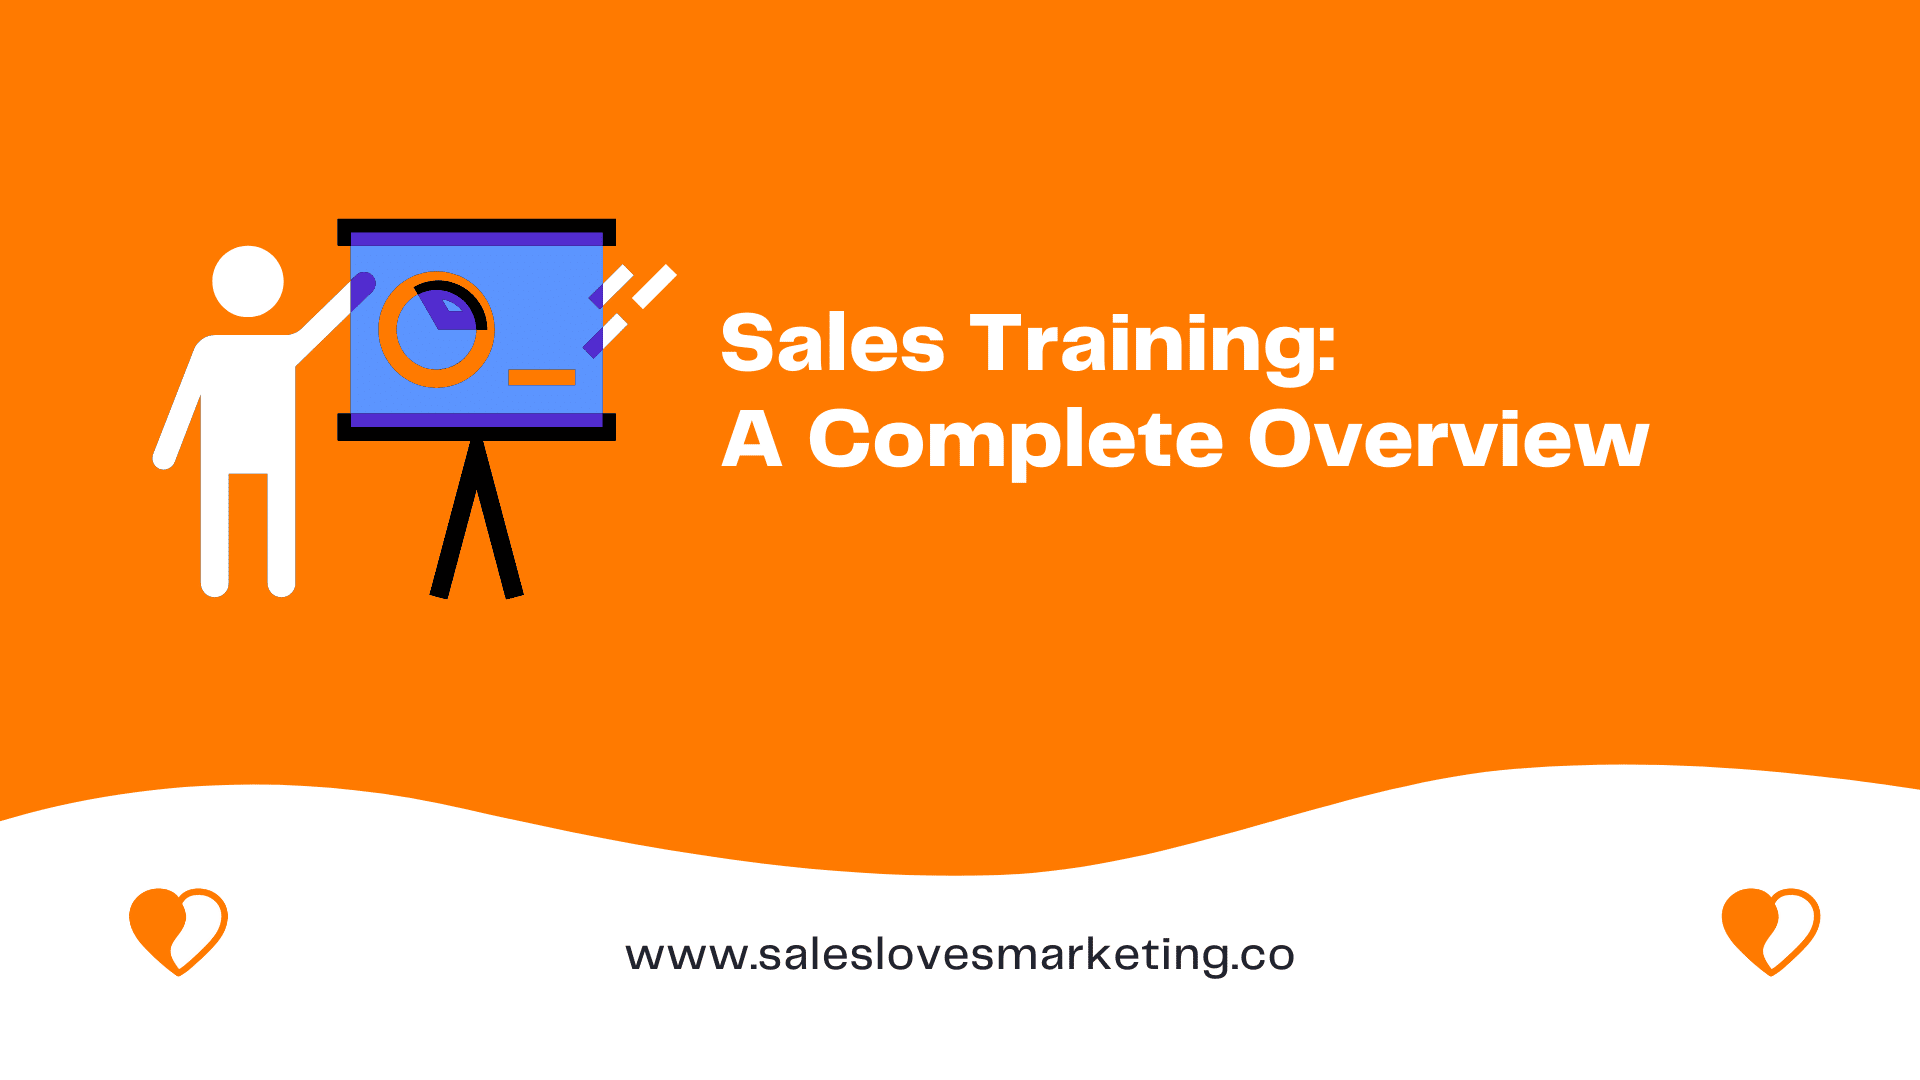 Sales Training: A Complete Overview